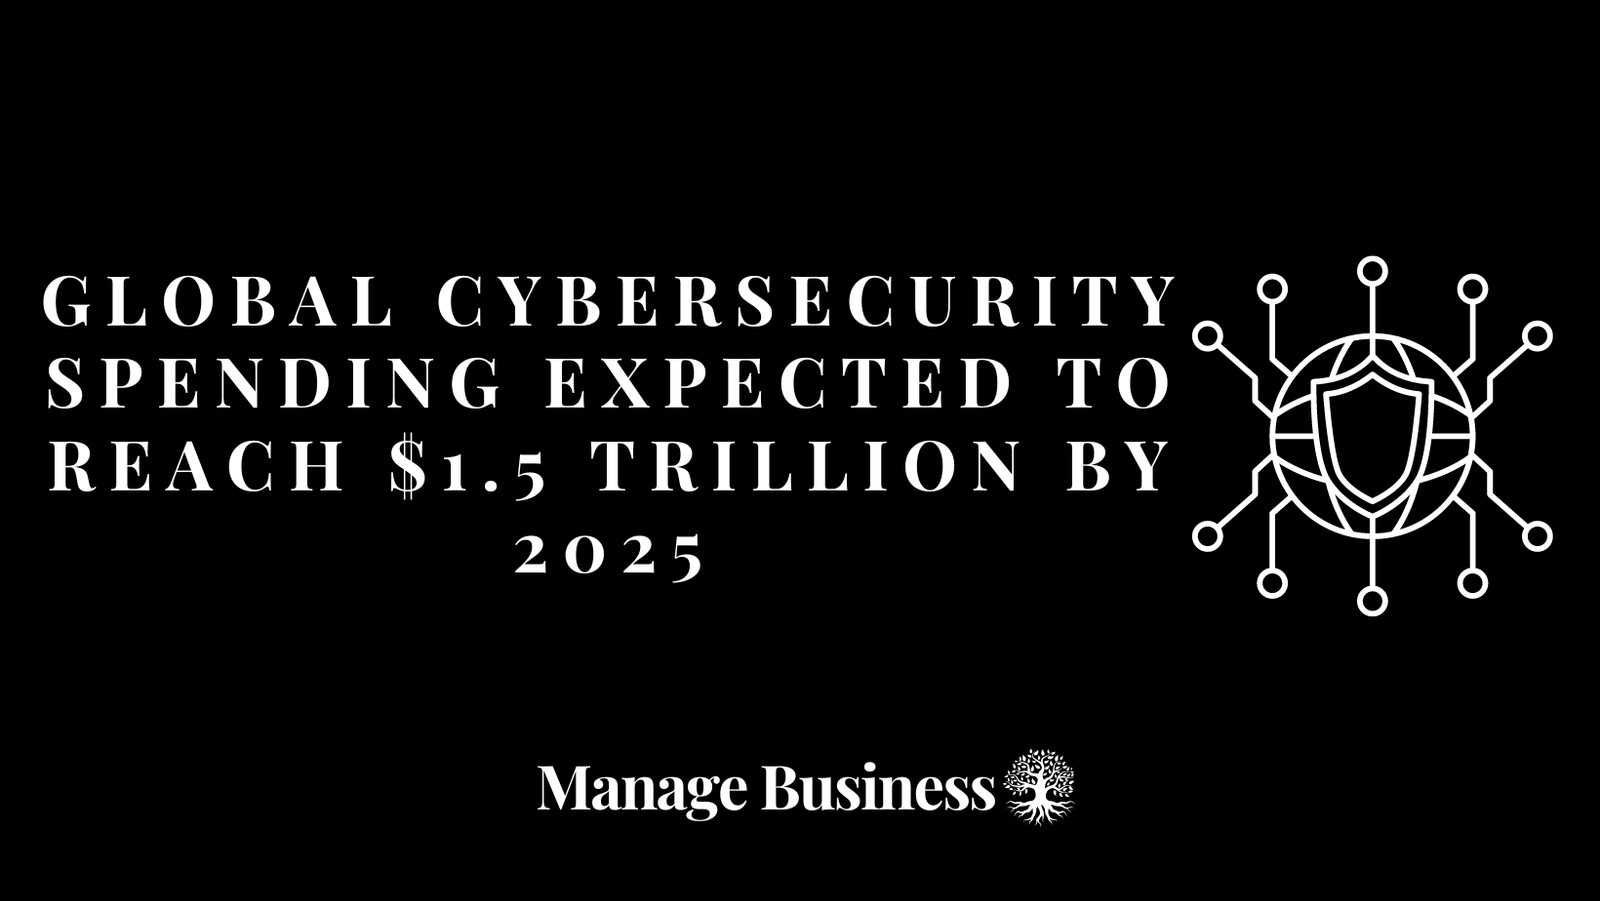 Global Cybersecurity Spending Expected to Reach $1.5 Trillion by 2025